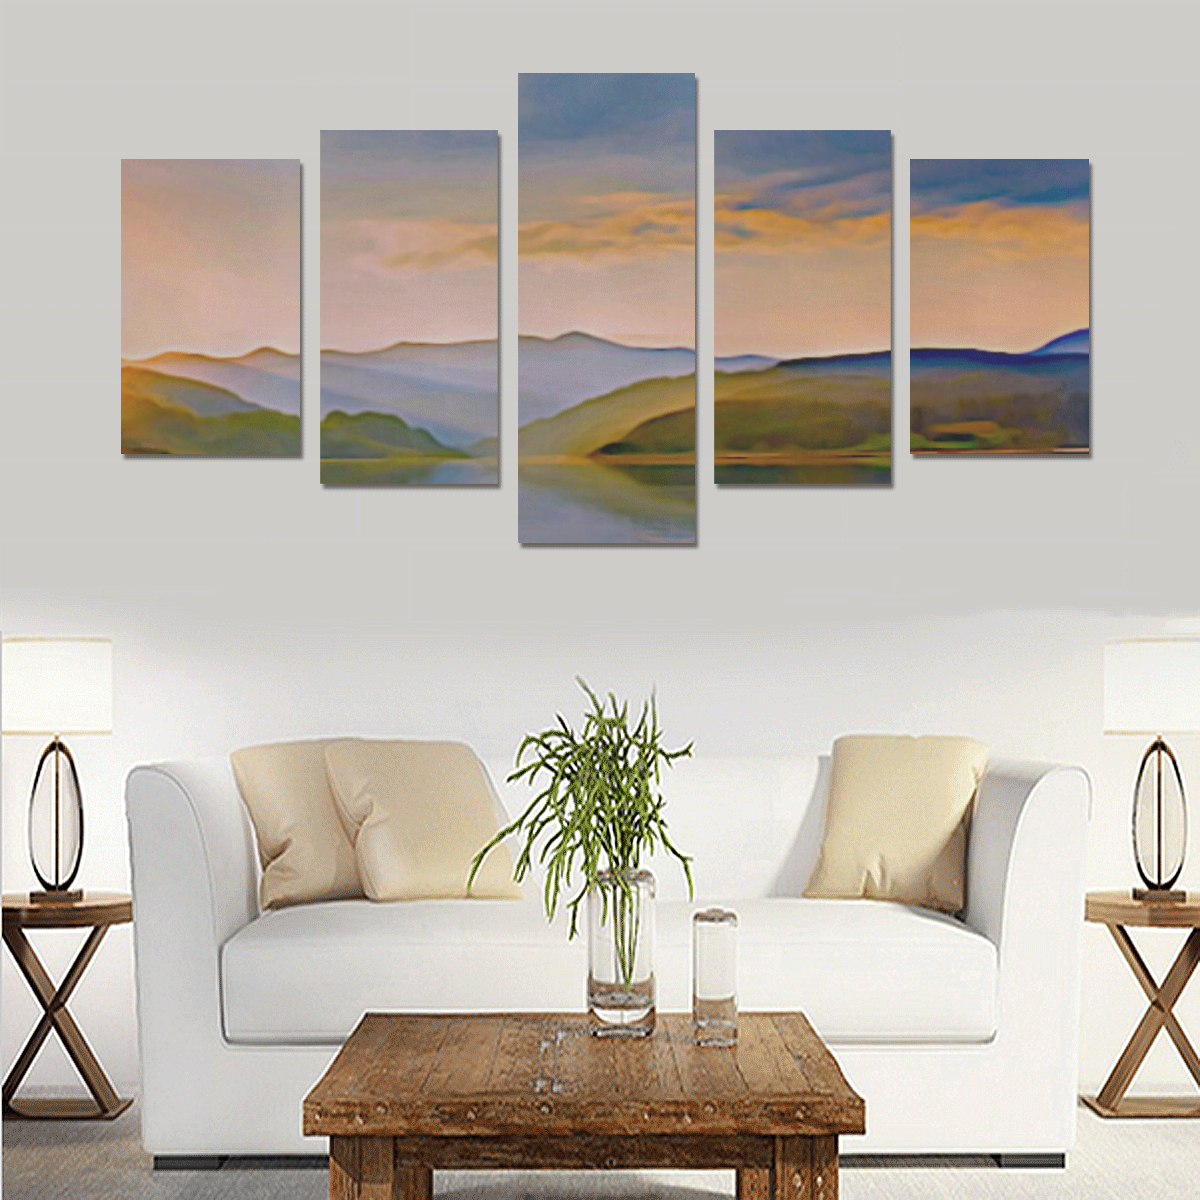 Travel to sunset 01 by JamColors Canvas Print Sets C (No Frame)